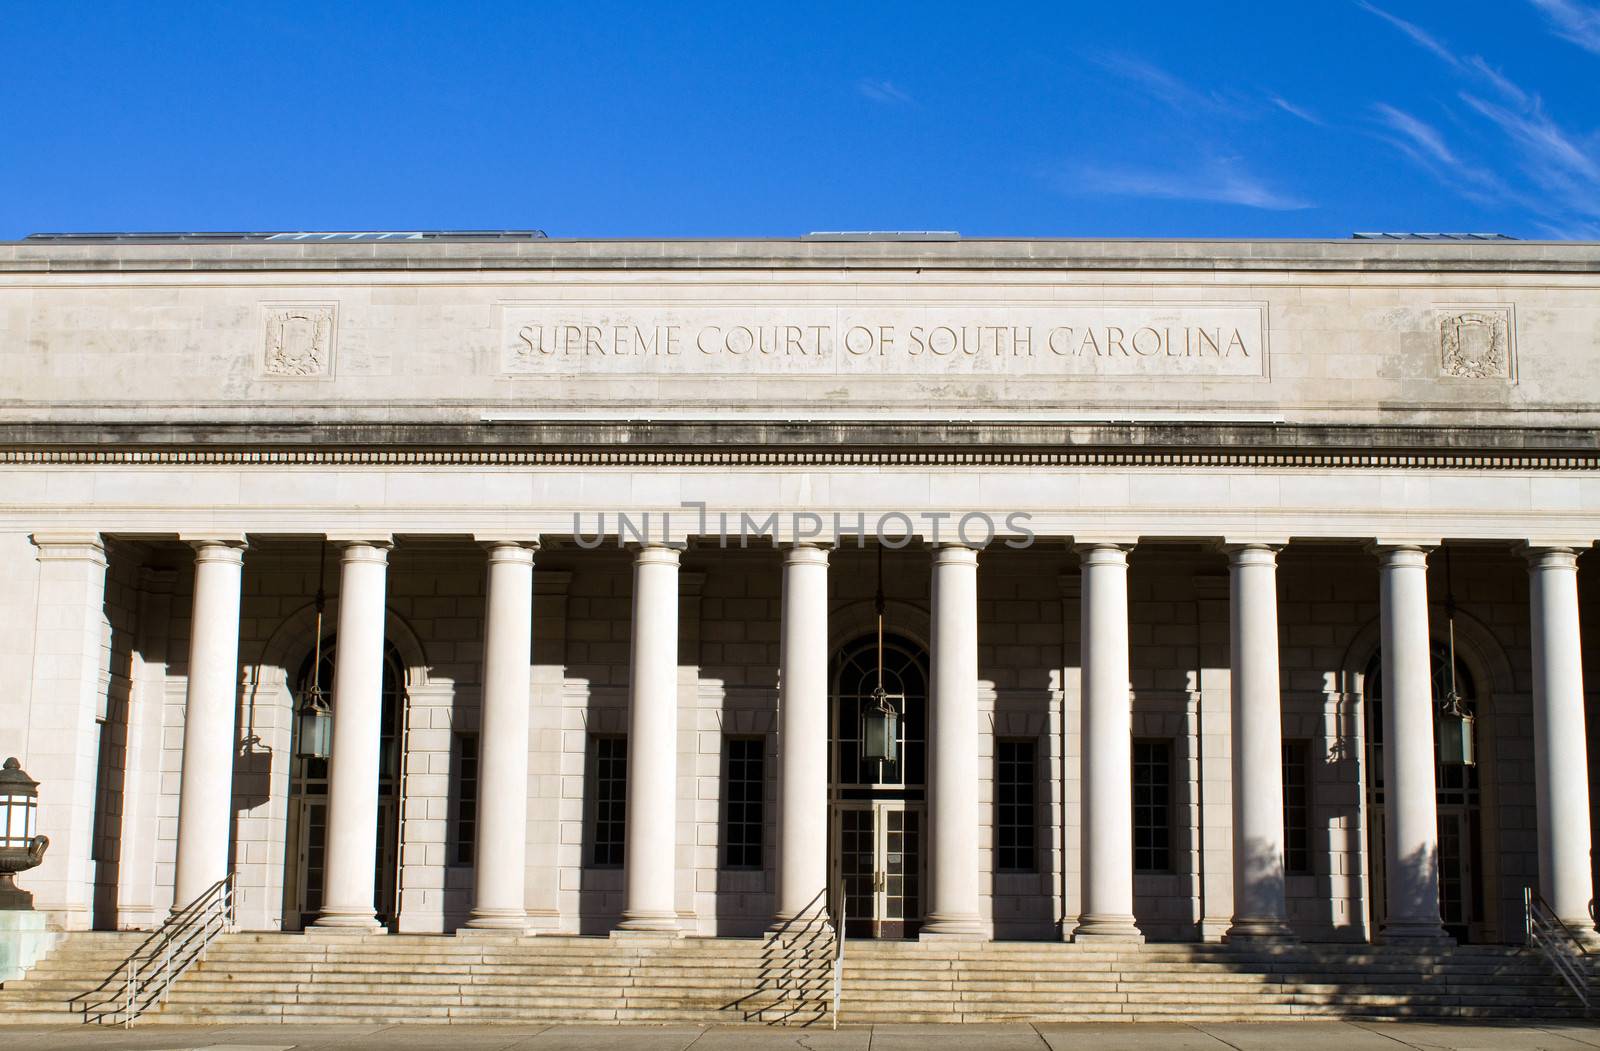 Supreme Court building of South Carolina located in Columbia, SC, USA.